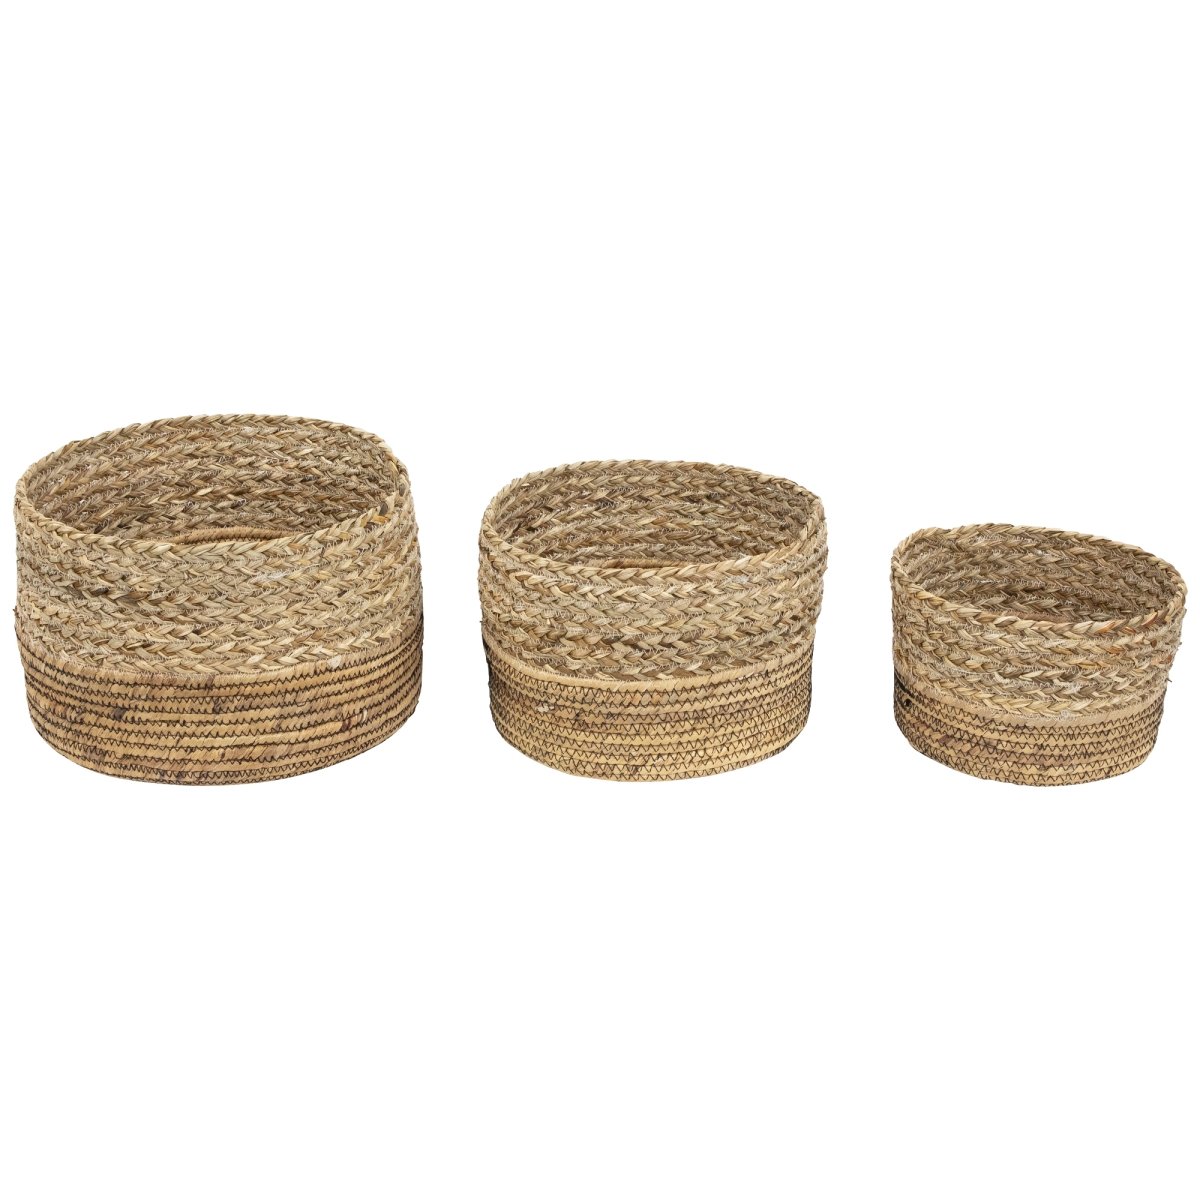 Picture of Northlight 35737406 9.75 in. Braid & Twist Woven Seagrass Storage Baskets - Set of 3